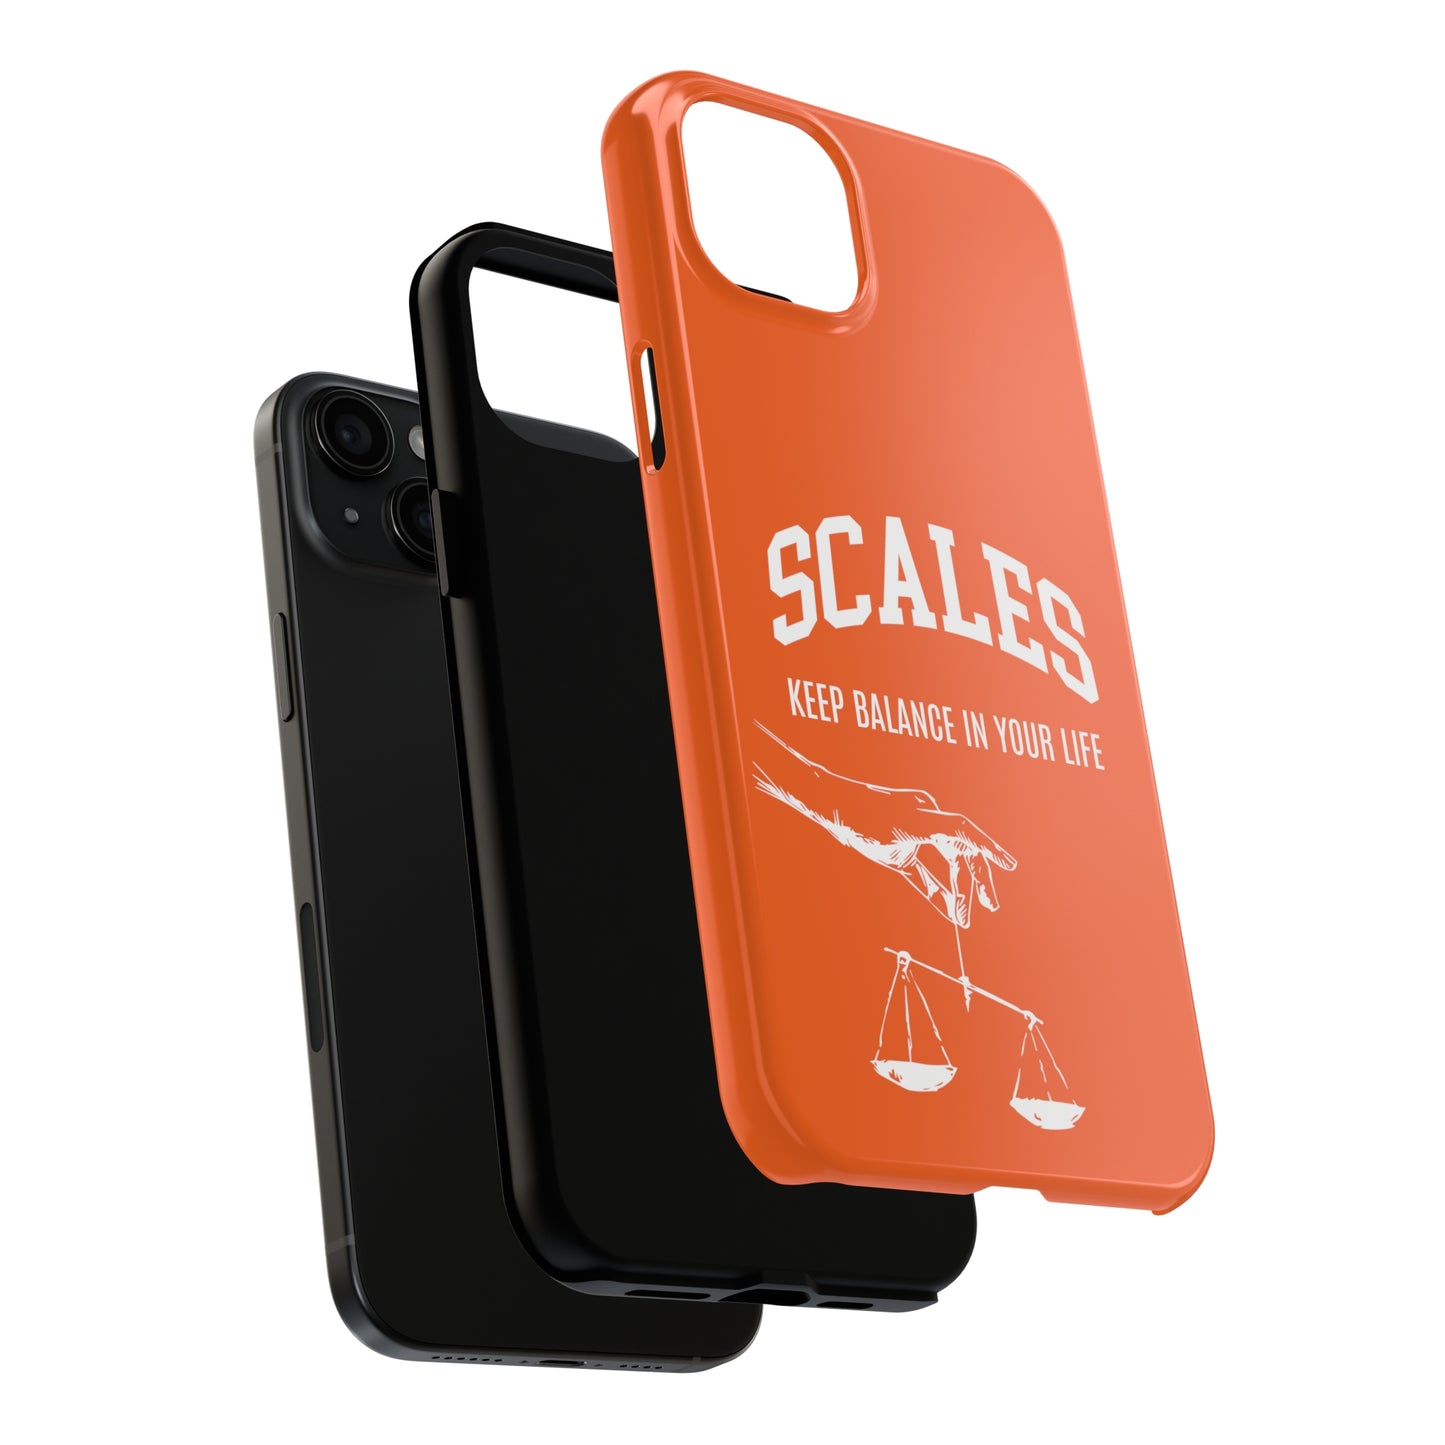 Scales Tough Phone Cases